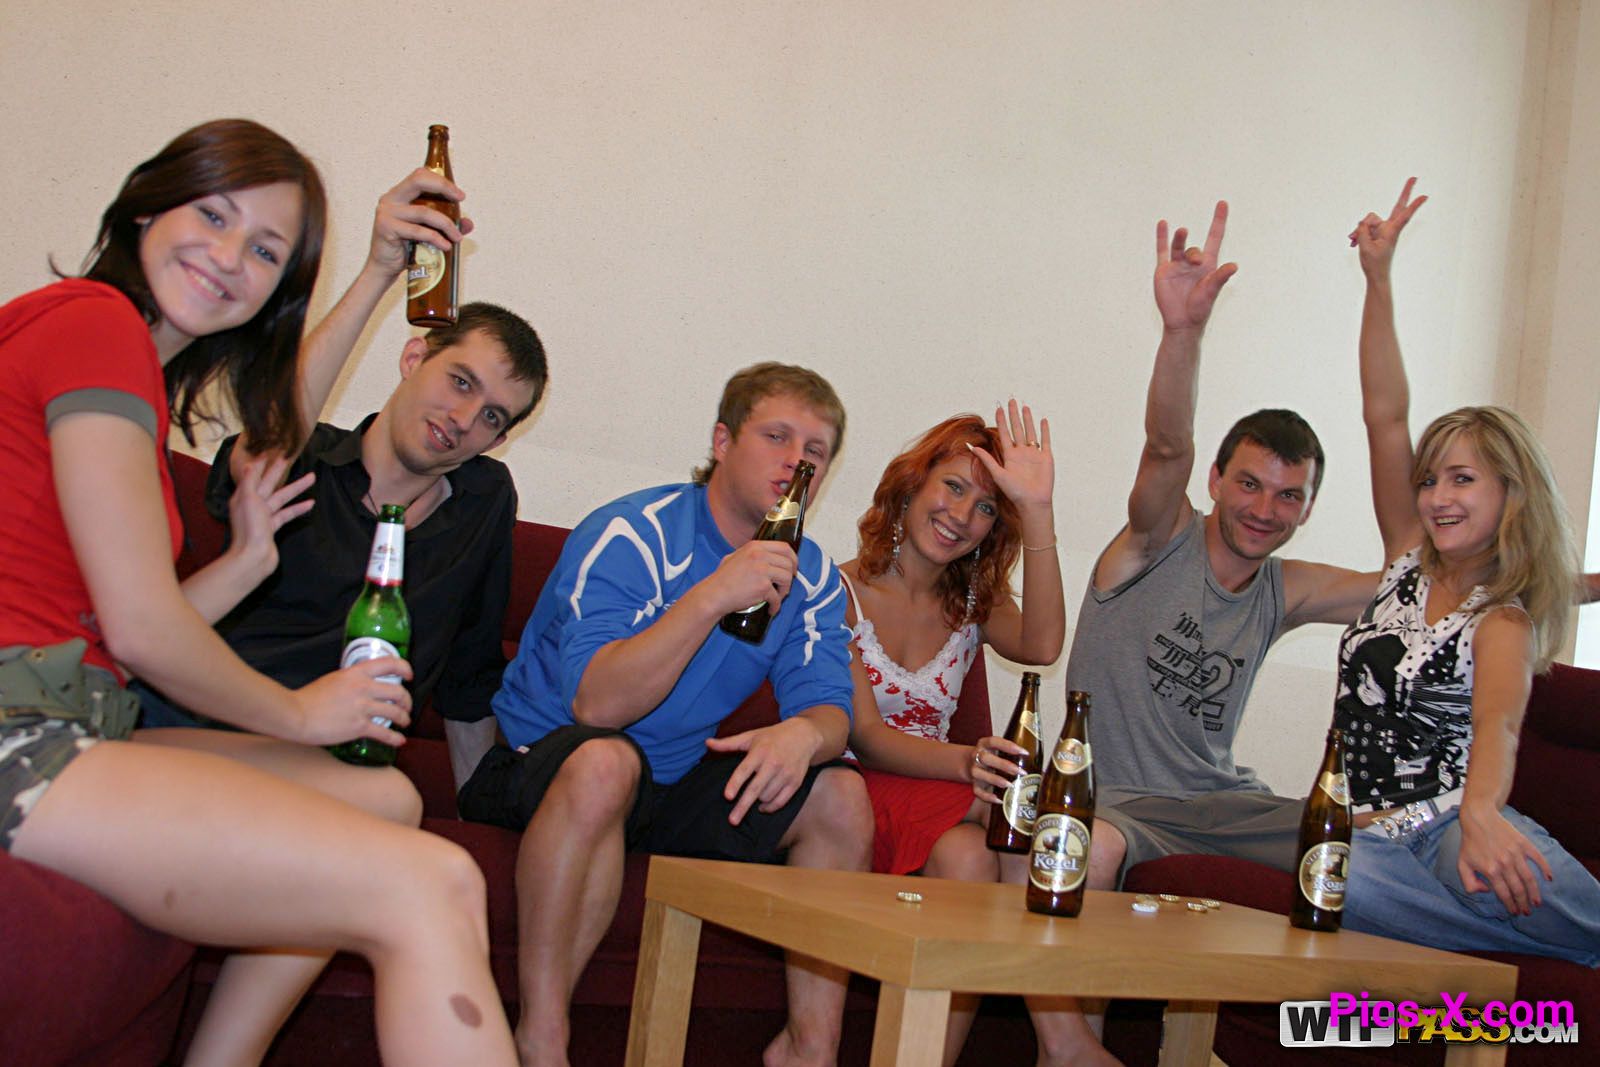 Nasty horny college girl sex party, part 3 - College Fuck Parties - Image 1